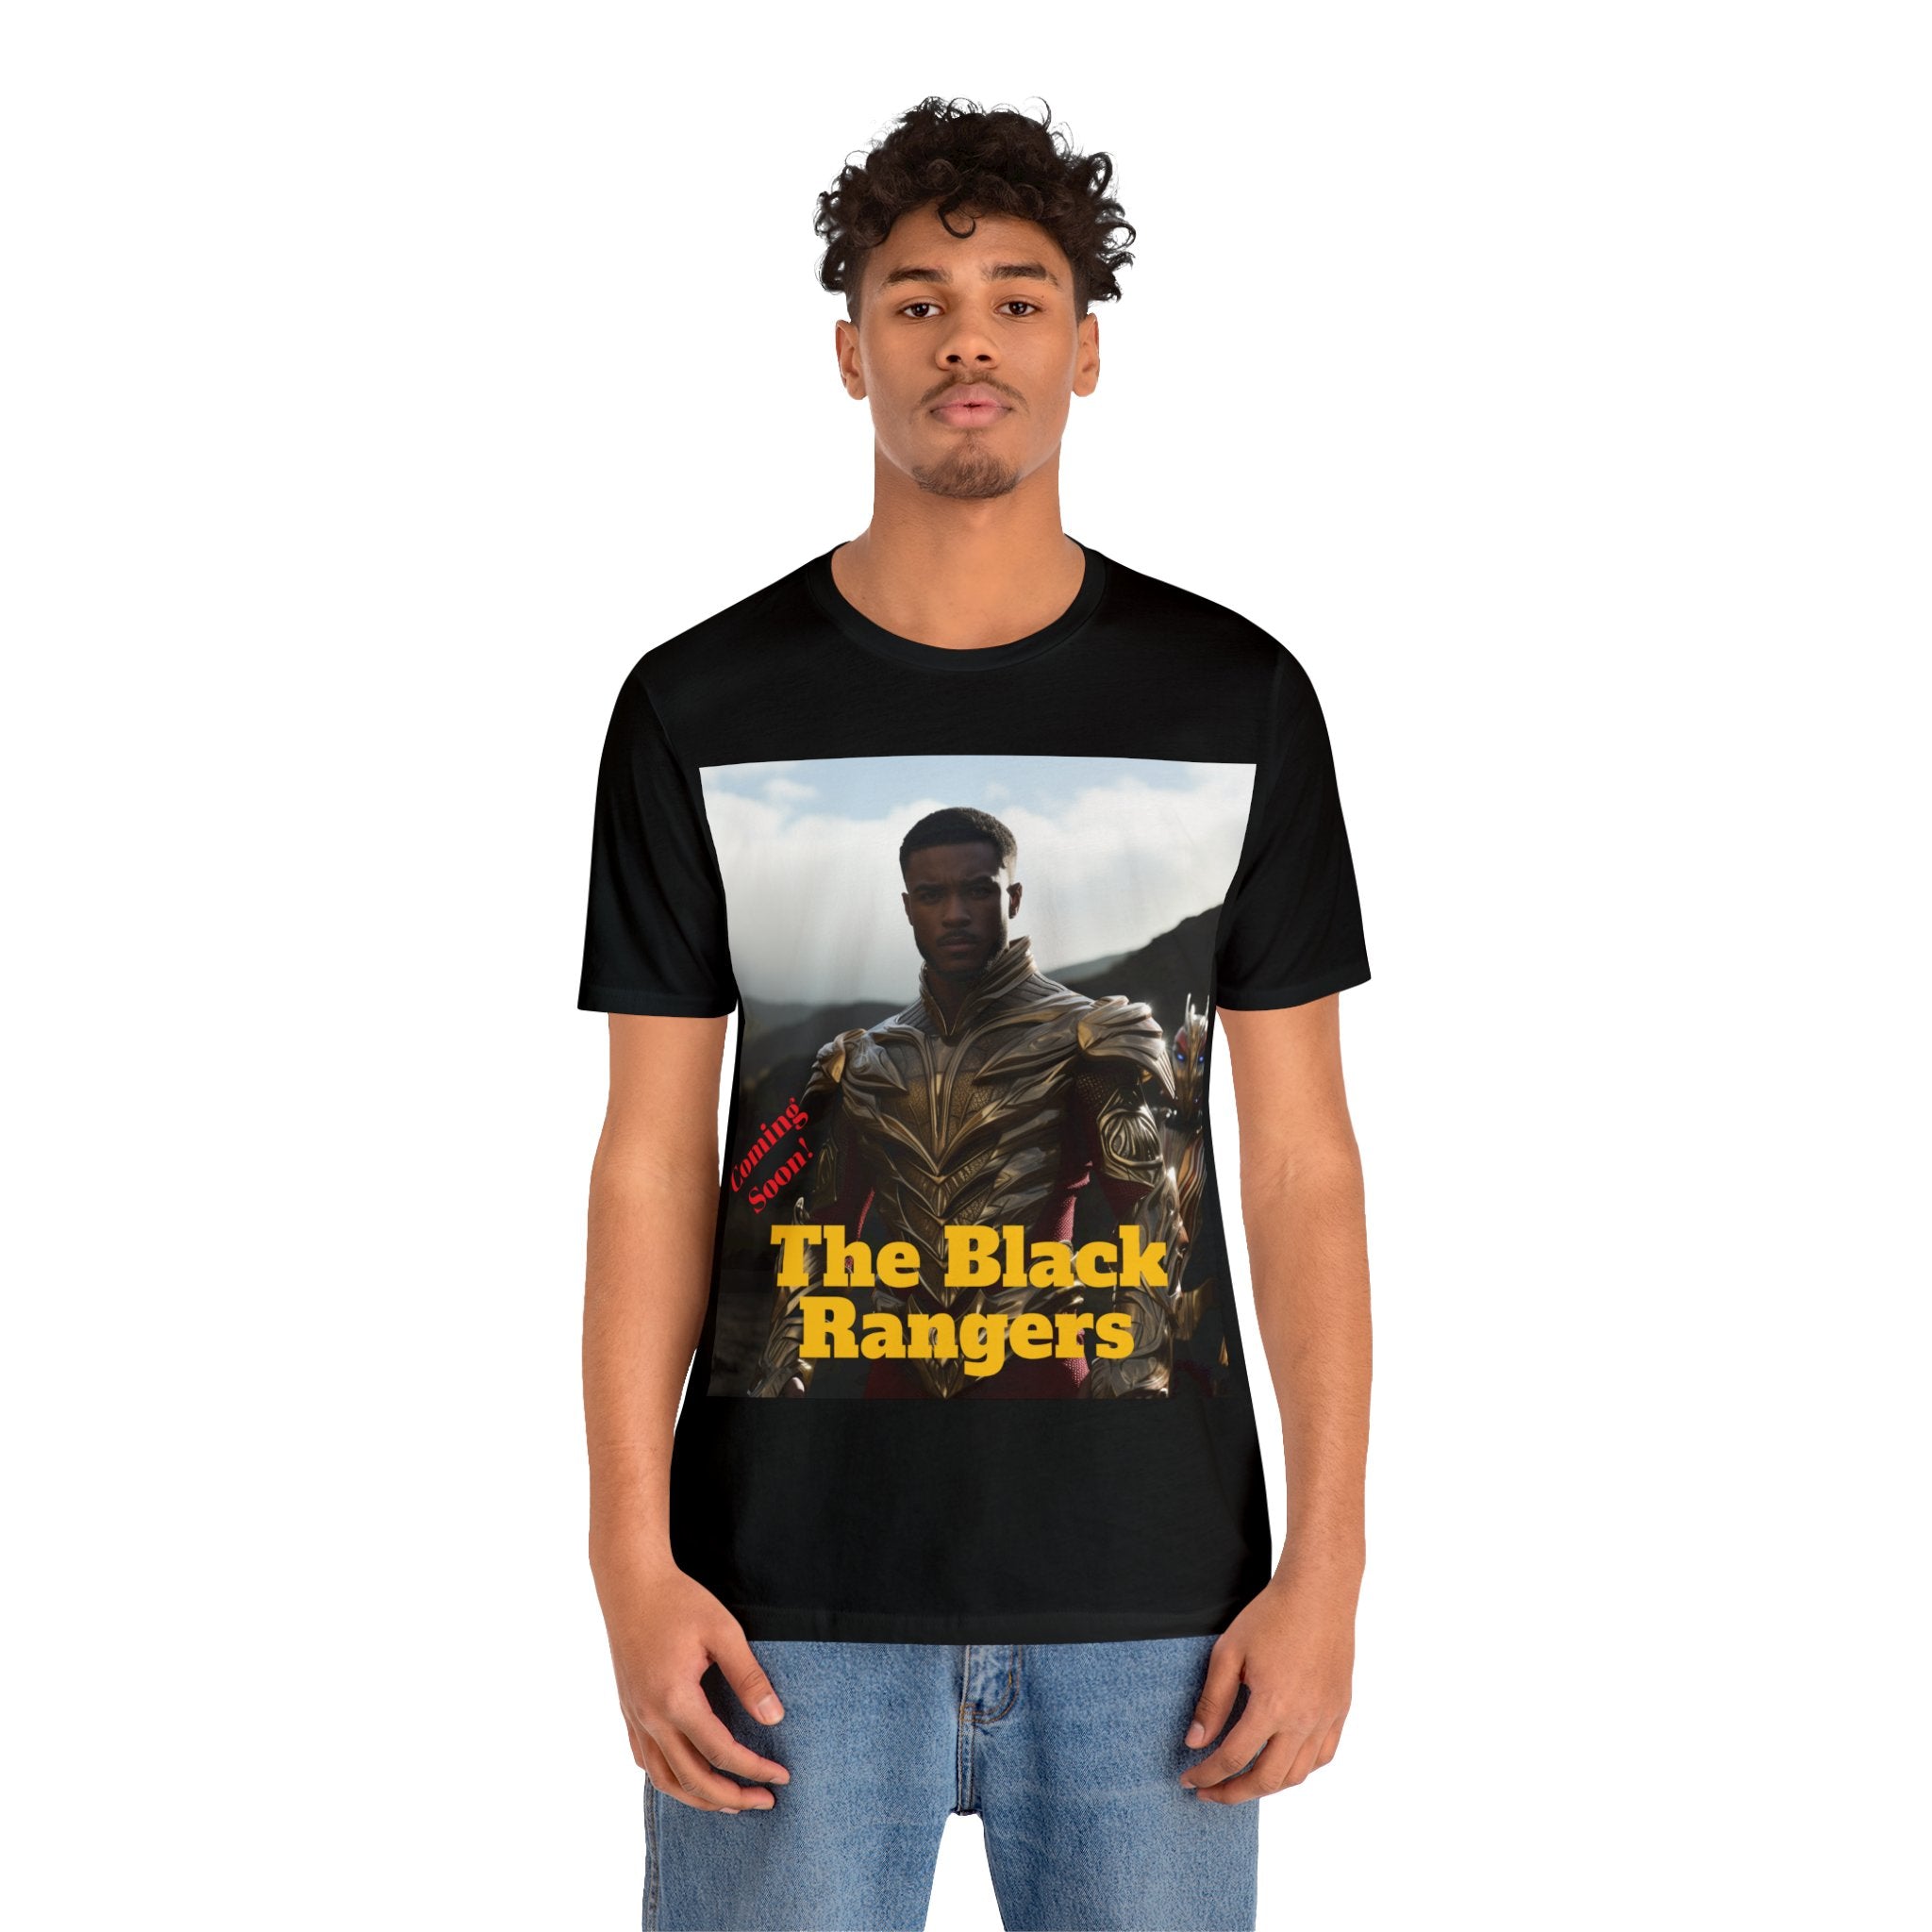 🦸🏾‍♂️ Empower Your Wardrobe with Heroic Inspiration: Introducing "The Black Rangers: Afro-American Excellence" Unisex Jersey Short Sleeve Tee. This Power Rangers inspired shirt celebrates the strength, diversity, and resilience of the Afro-American community, merging the excitement of superhero lore with cultural pride.